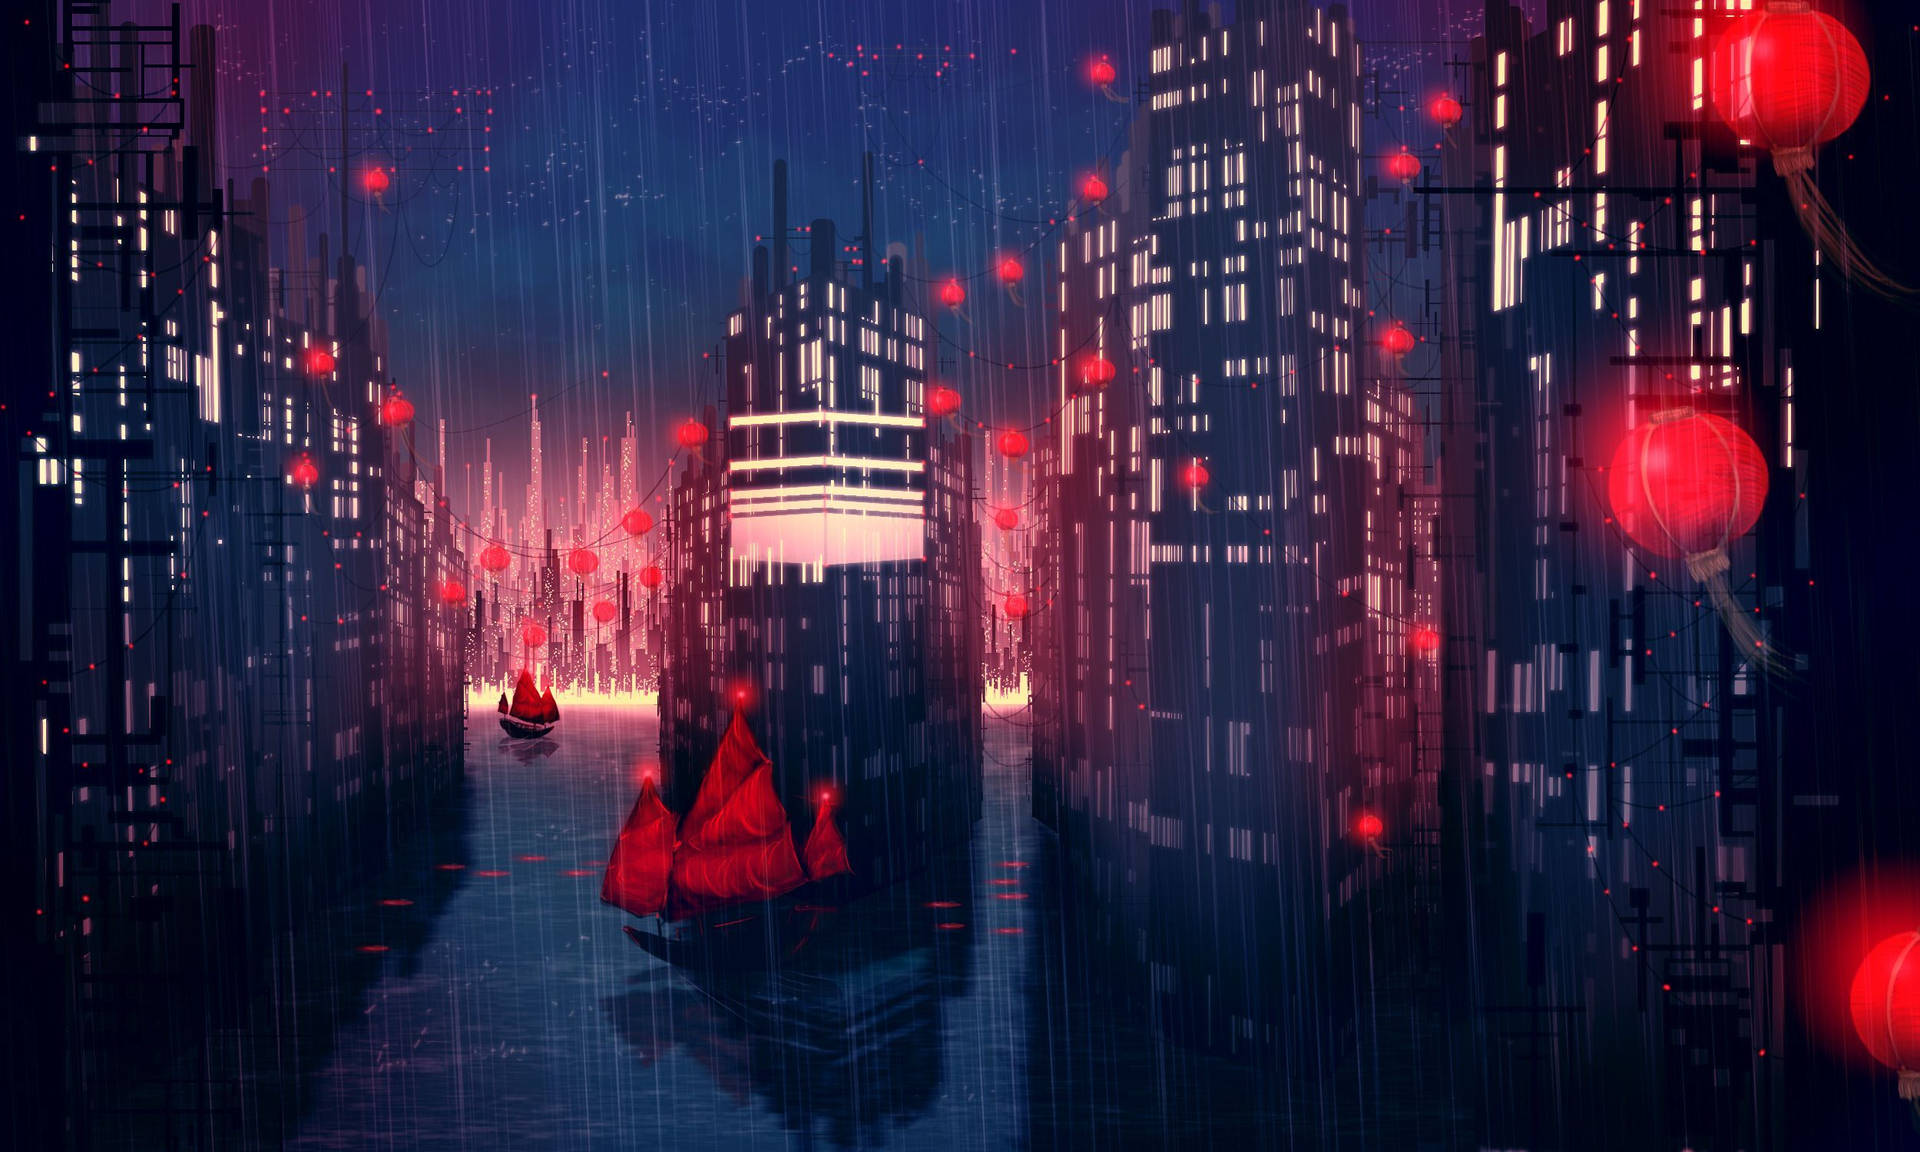 Animation Black And Red City With Boats Wallpaper